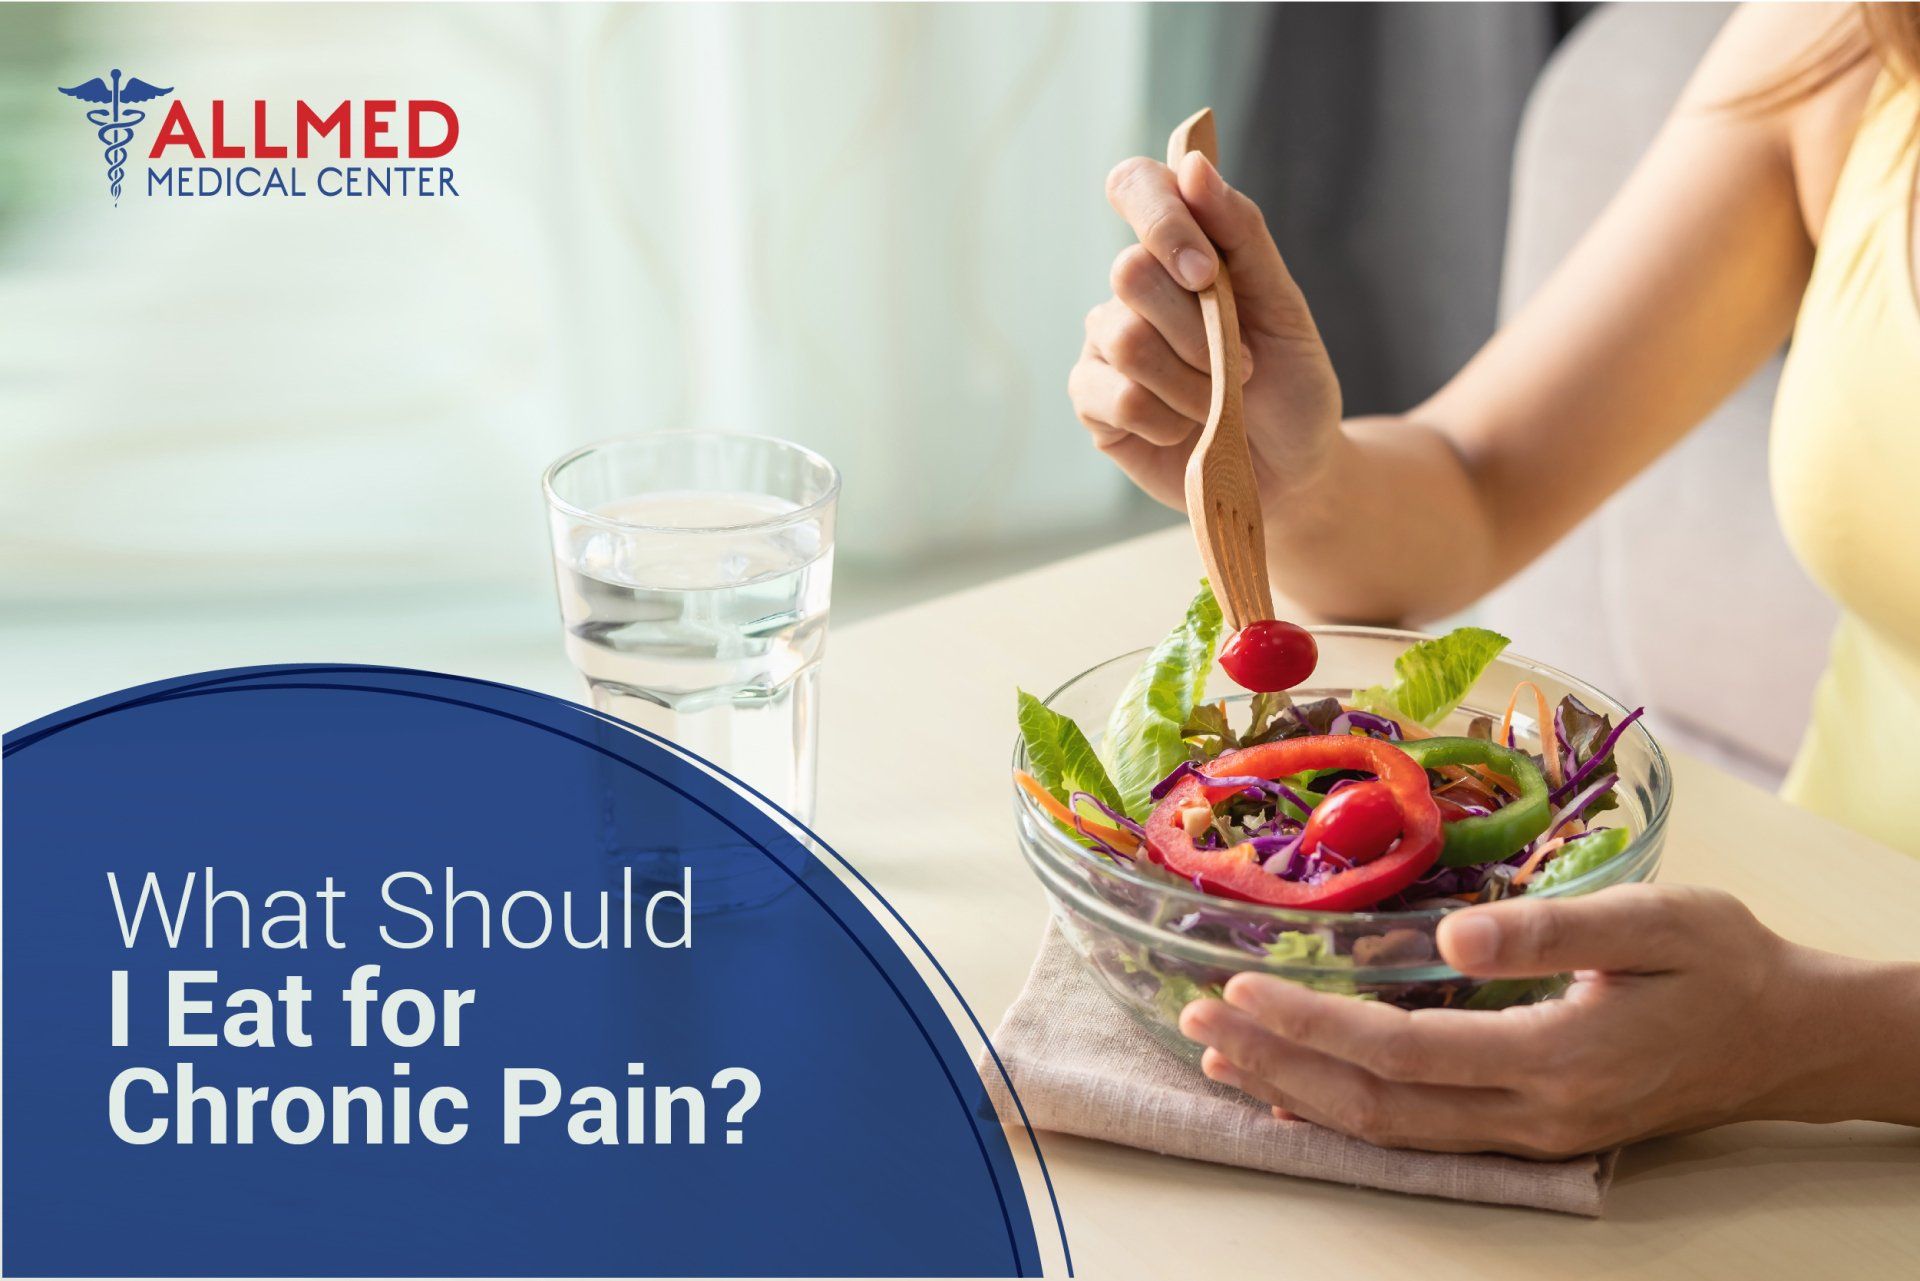 What Should I Eat for Chronic Pain?